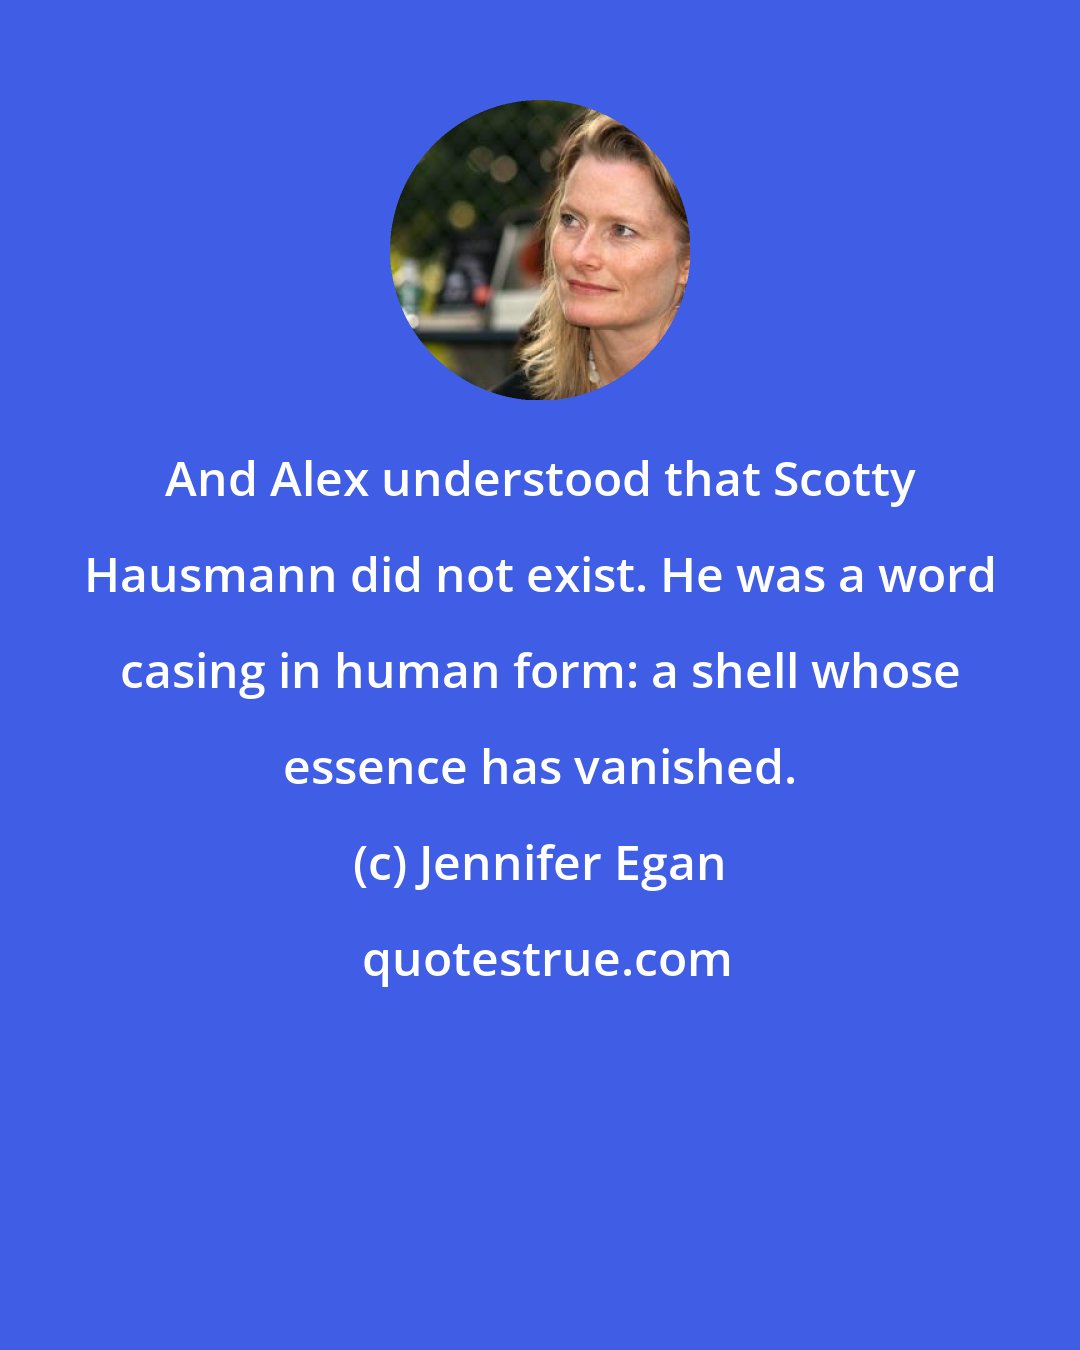 Jennifer Egan: And Alex understood that Scotty Hausmann did not exist. He was a word casing in human form: a shell whose essence has vanished.